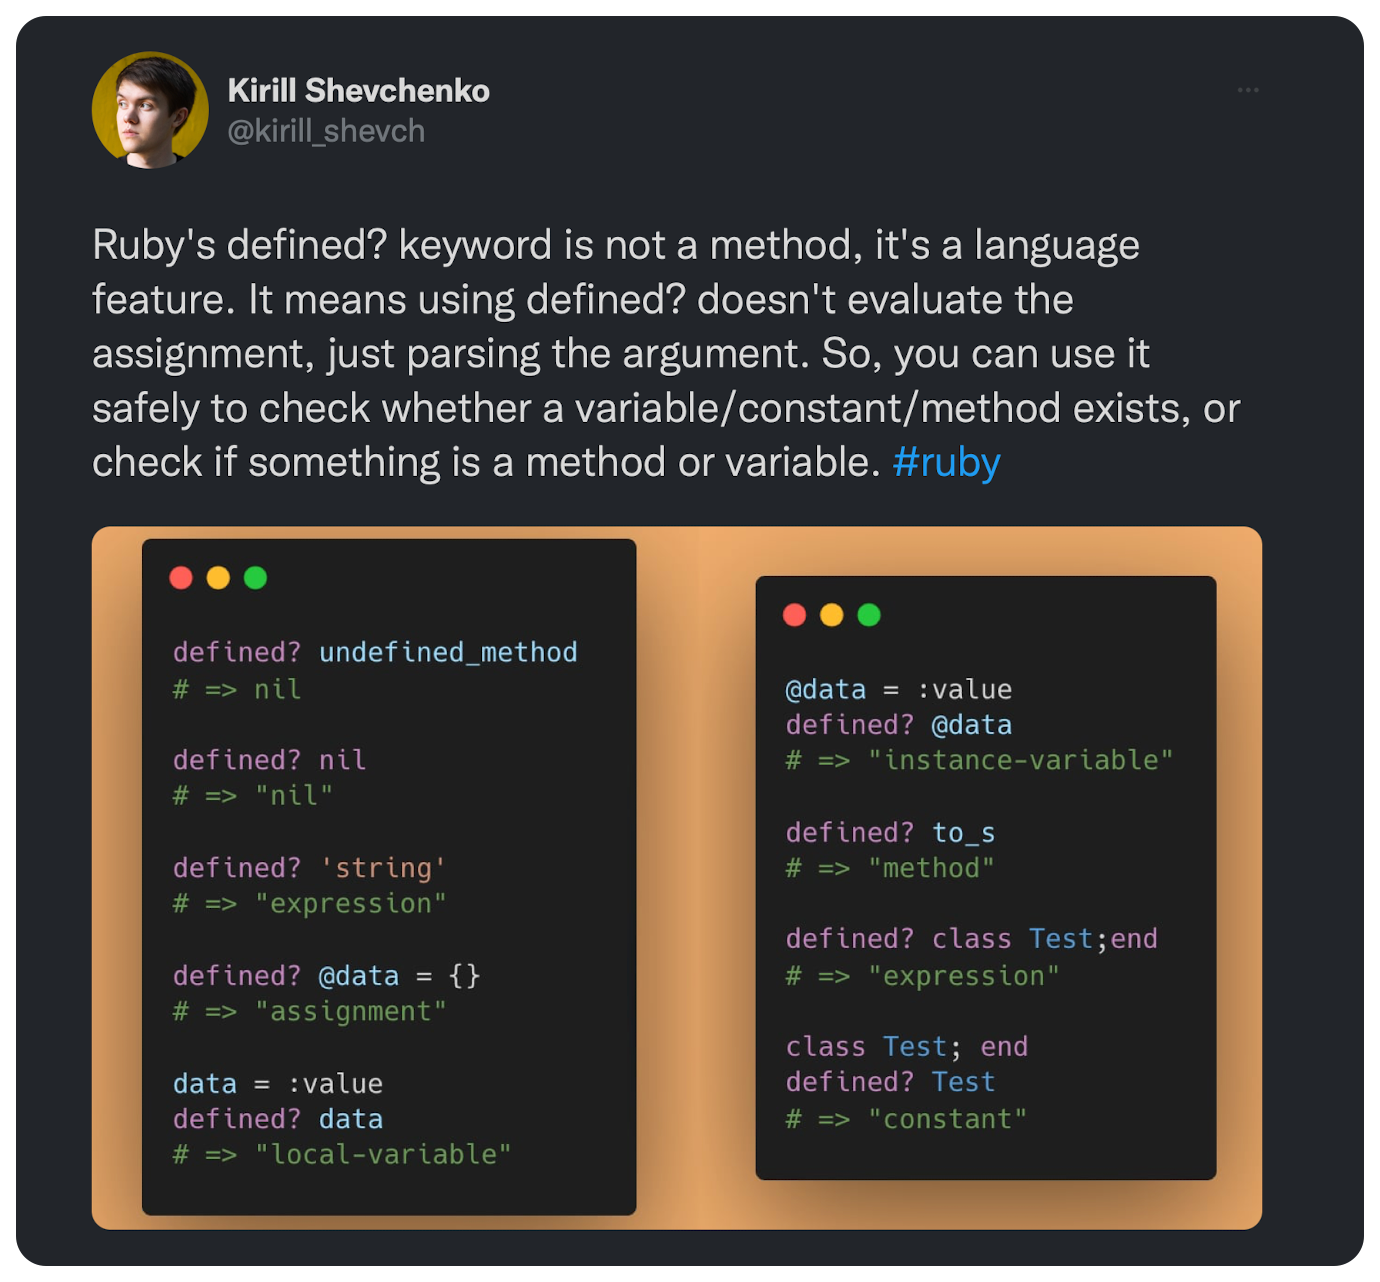 Ruby's defined? keyword is not a method, it's a language feature. It means using defined? doesn't evaluate the assignment, just parsing the argument. So, you can use it safely to check whether a variable/constant/method exists, or check if something is a method or variable. #ruby